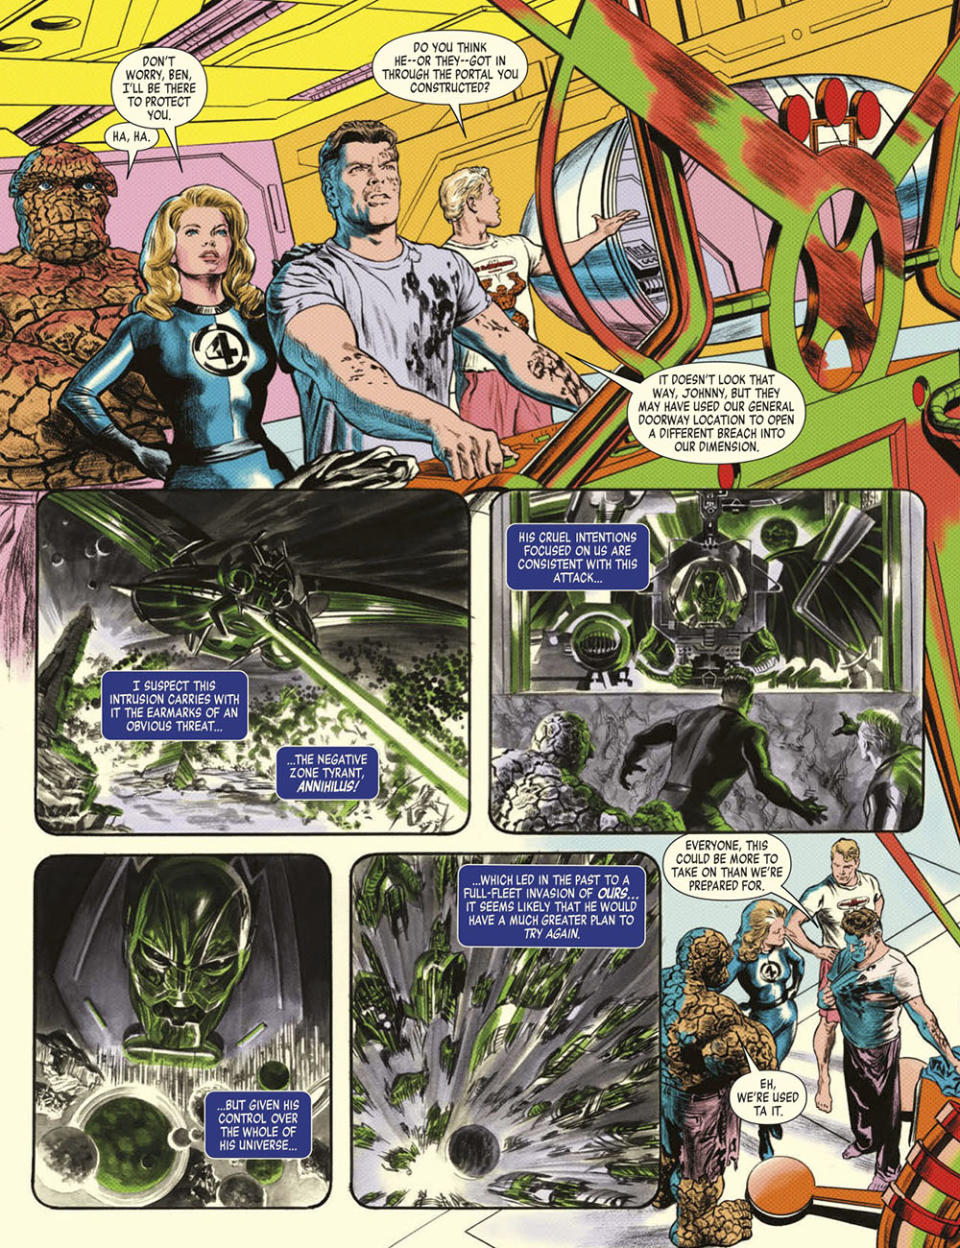 Fantastic Four: Full Circle by Alex Ross